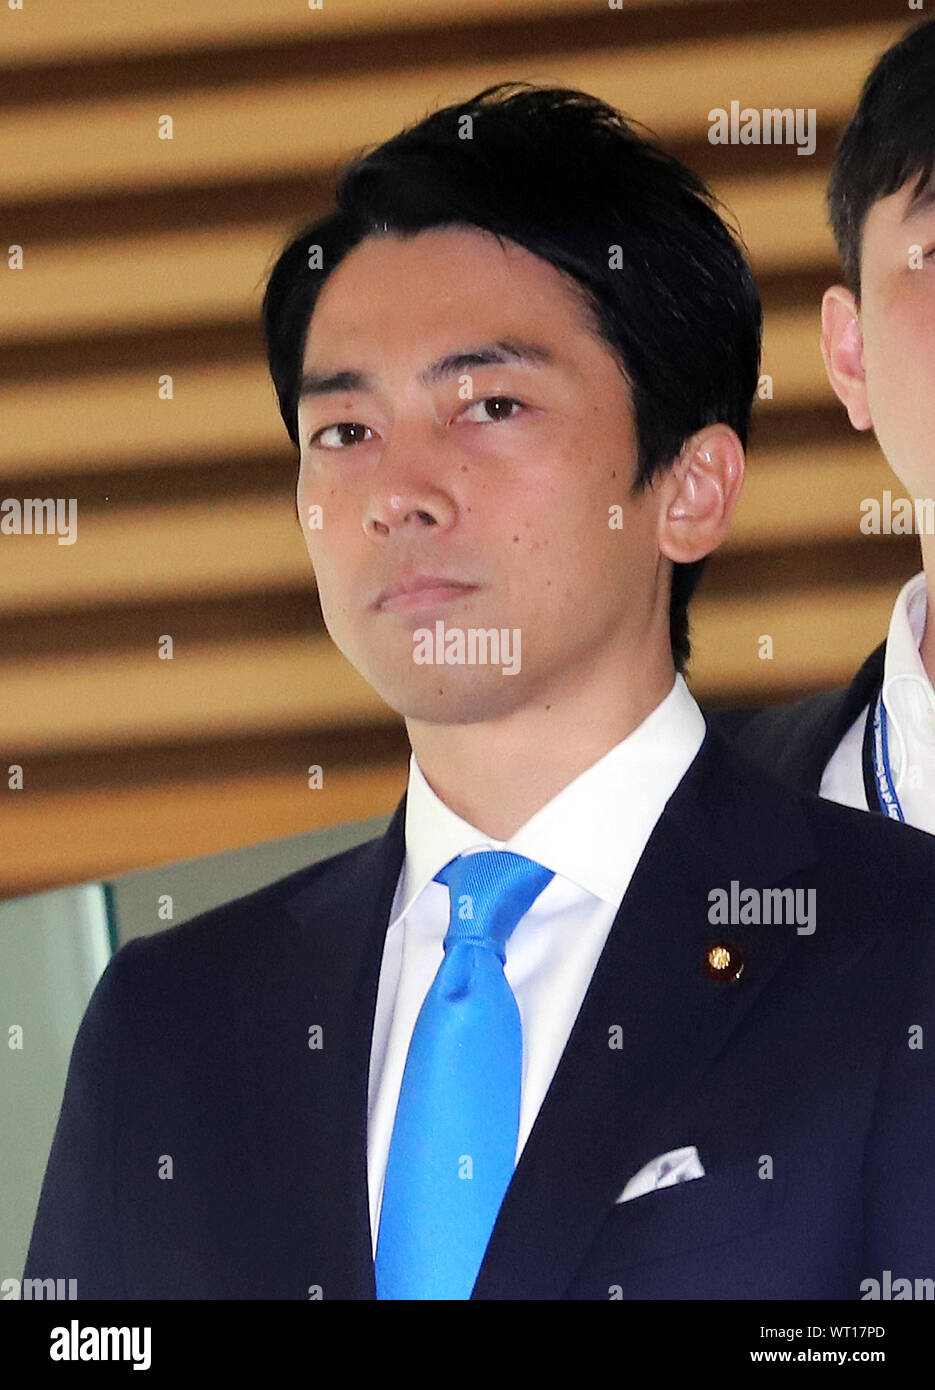 Tokyo Japan 11th Sep 2019 The New Environment Minister